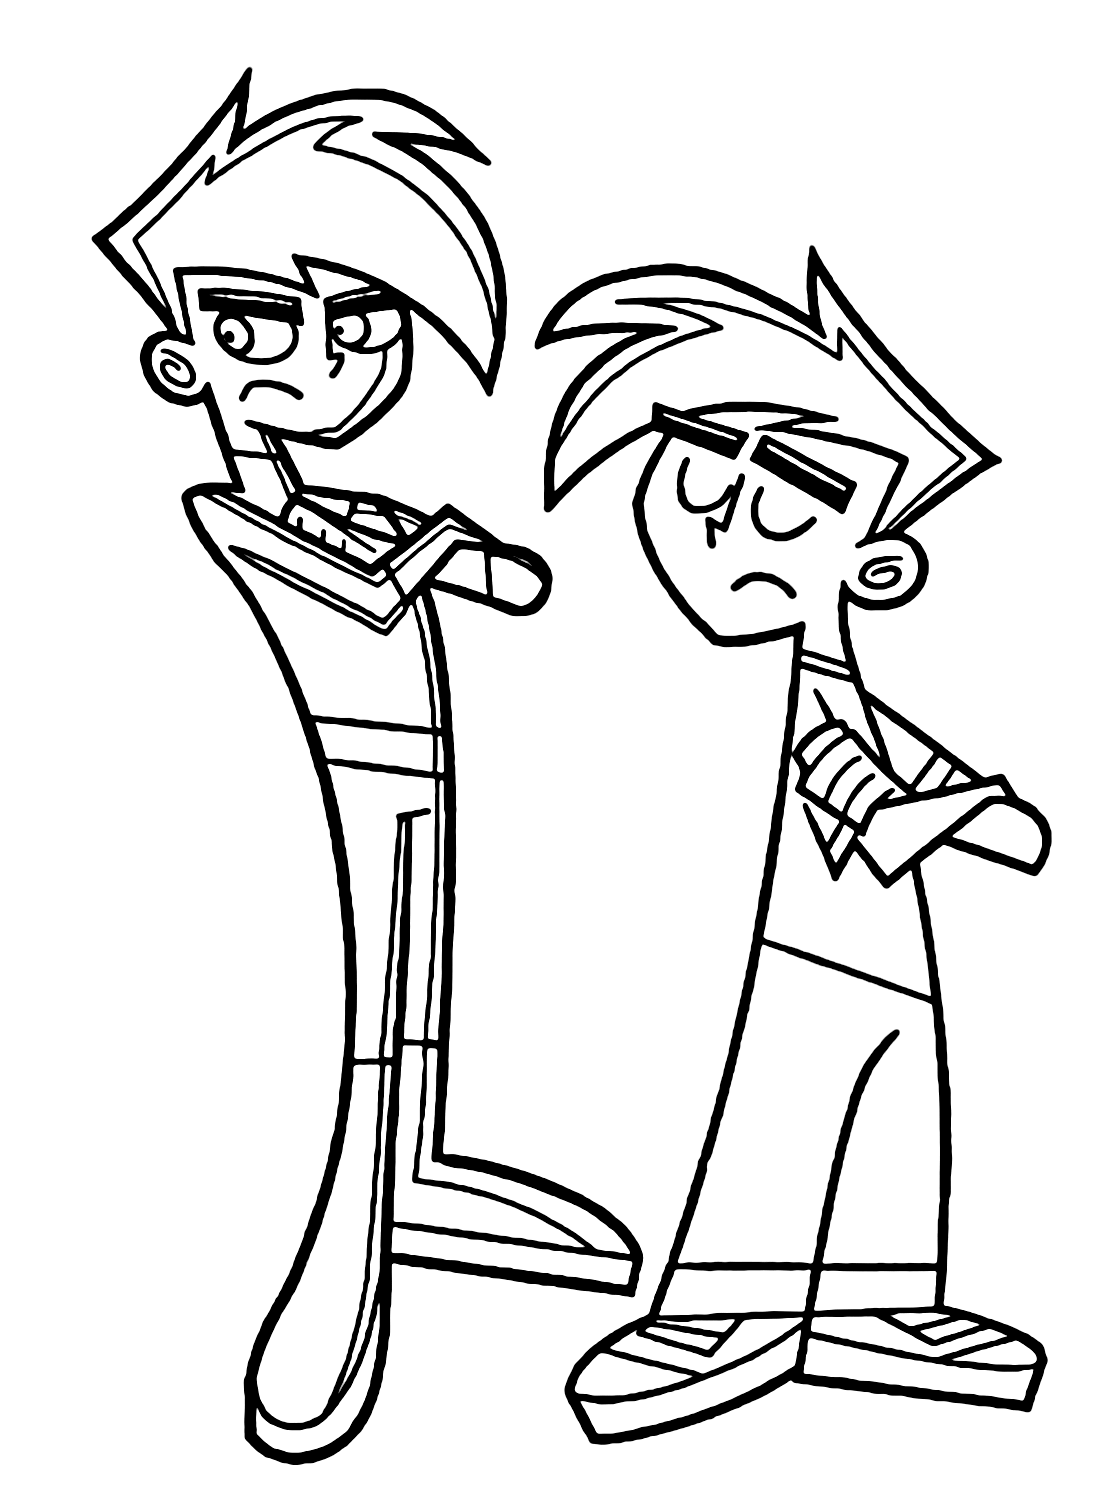 Characters from Danny Phantom Coloring Pages